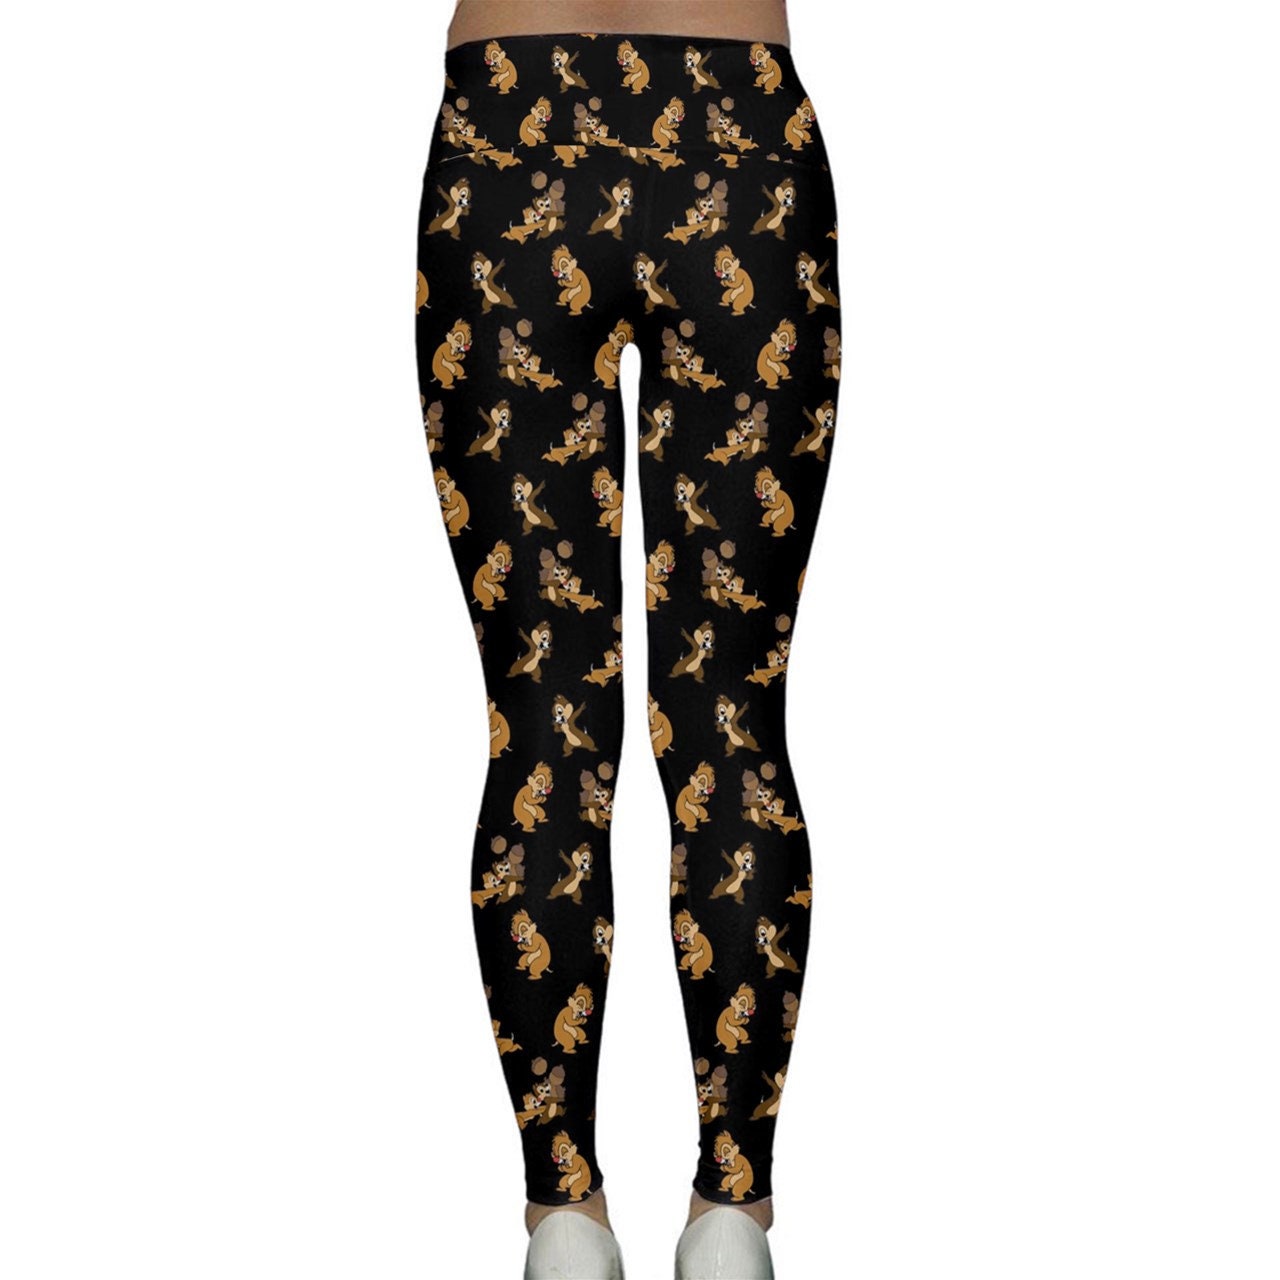 Chip and Dale Leggings  Chip and Dale Pants Disney Leggings sold